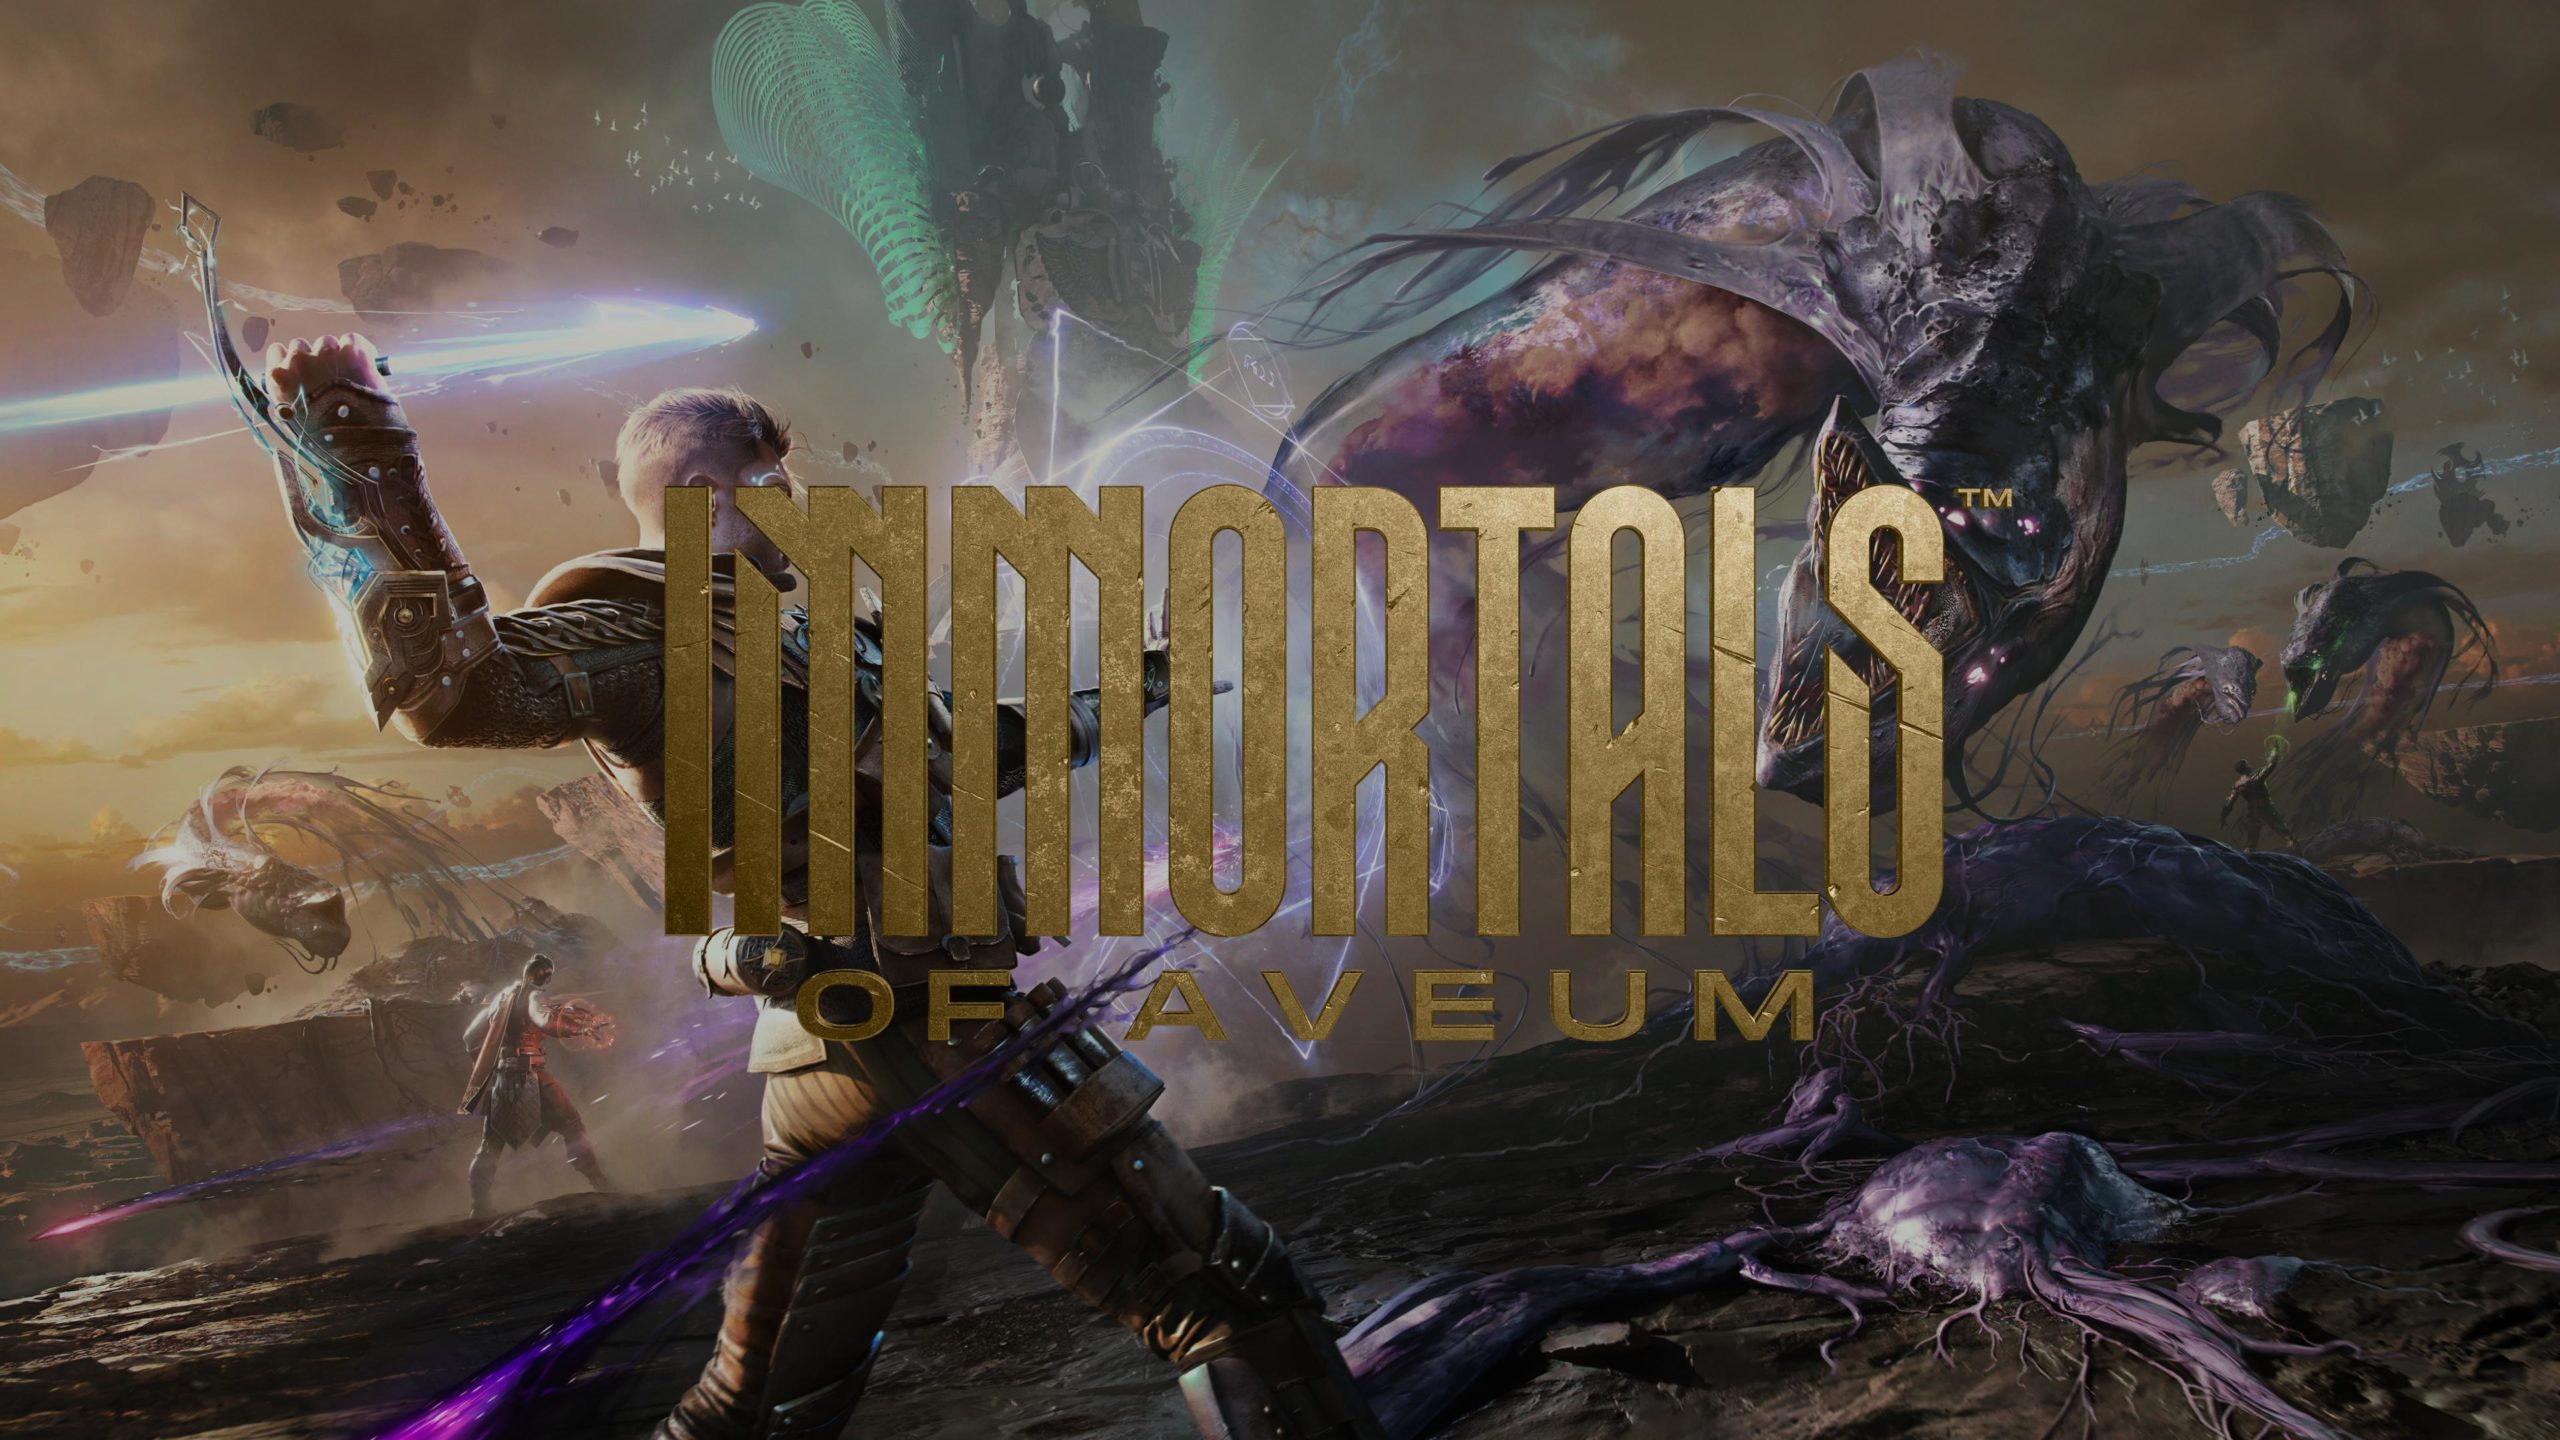 Immortals of Aveum is more than just Call of Duty with magic